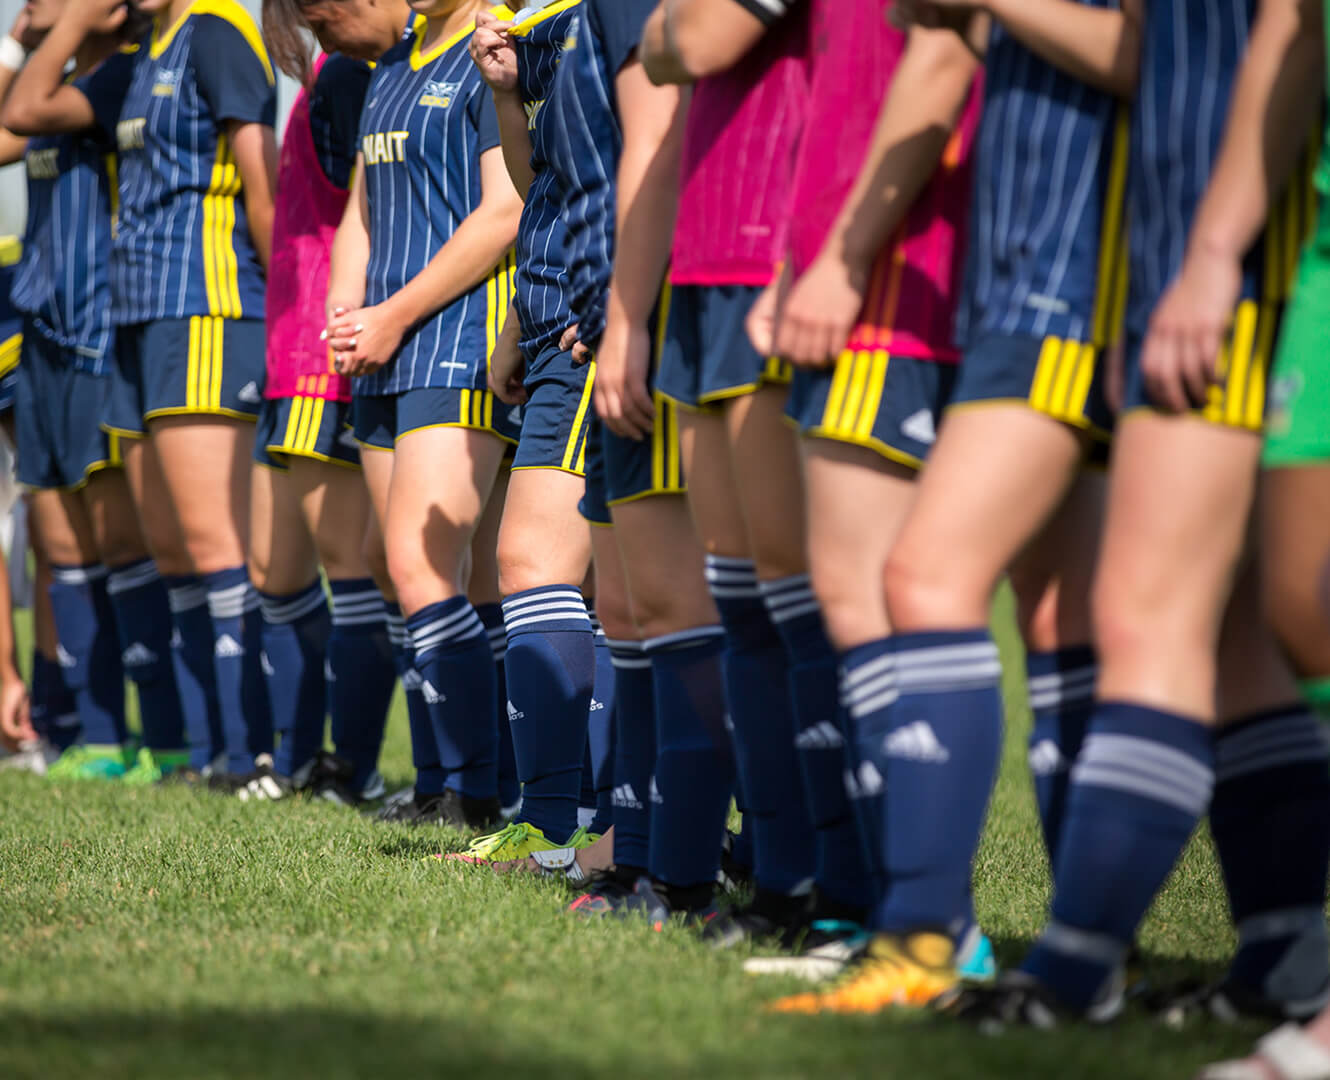 NAIT Ooks women's soccer team stands in a line on the grass